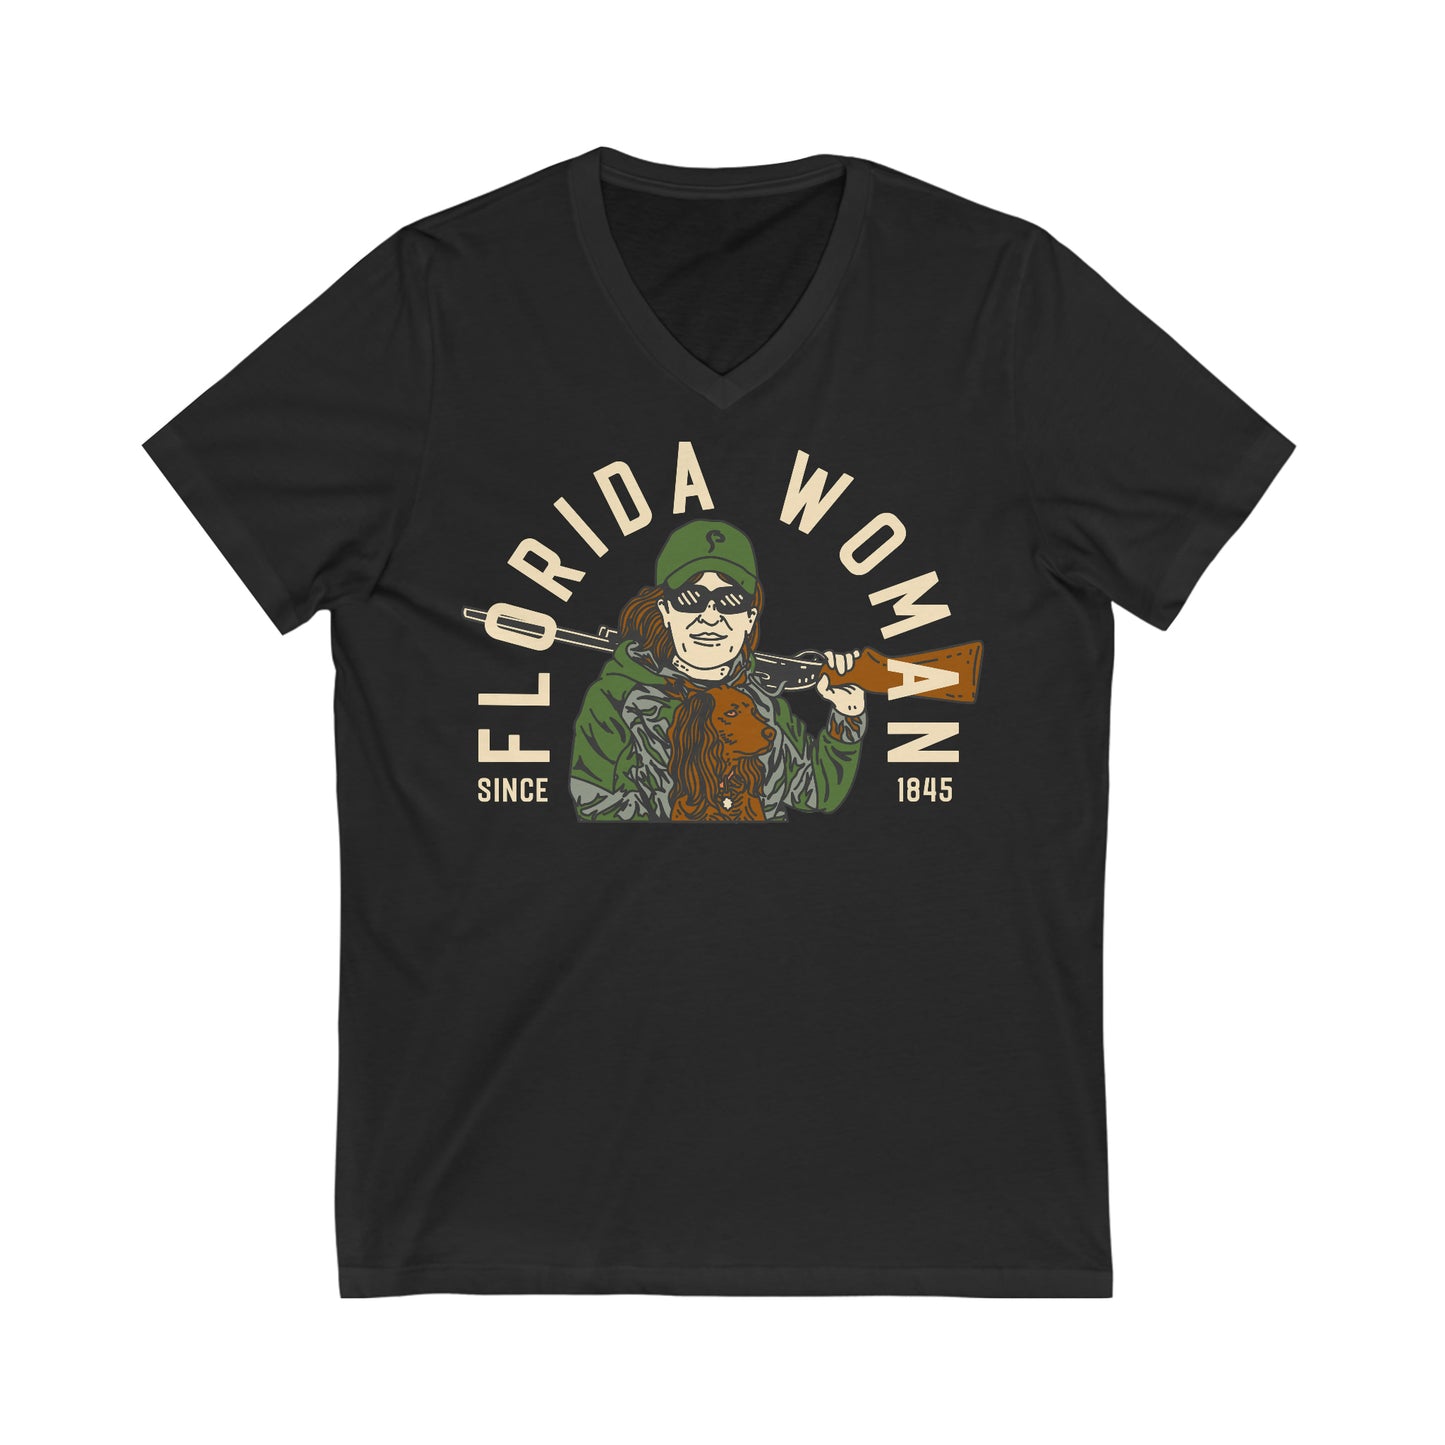 Florida Woman - Huntress of the South - Unisex Jersey Short Sleeve V-Neck Tee